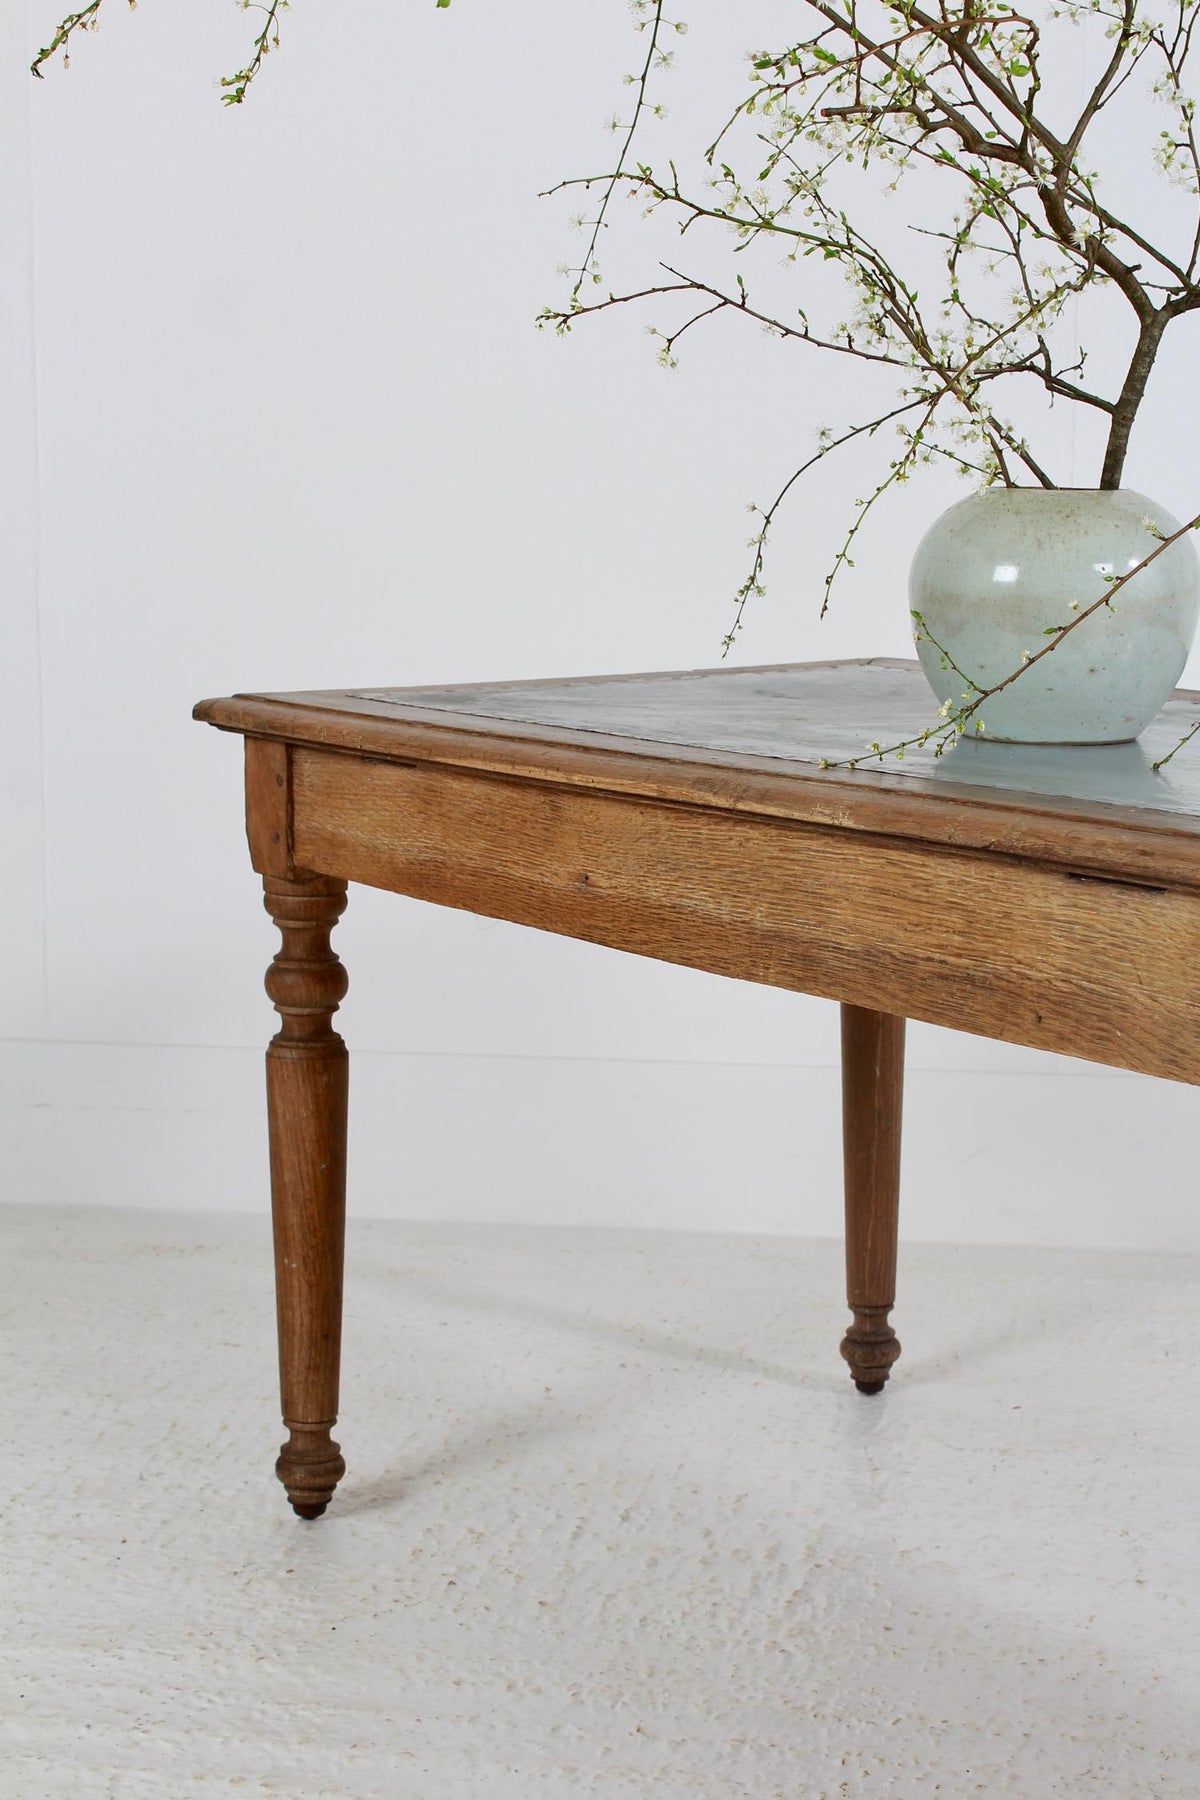 Antique English Oak  19thC Table with Zinc Top